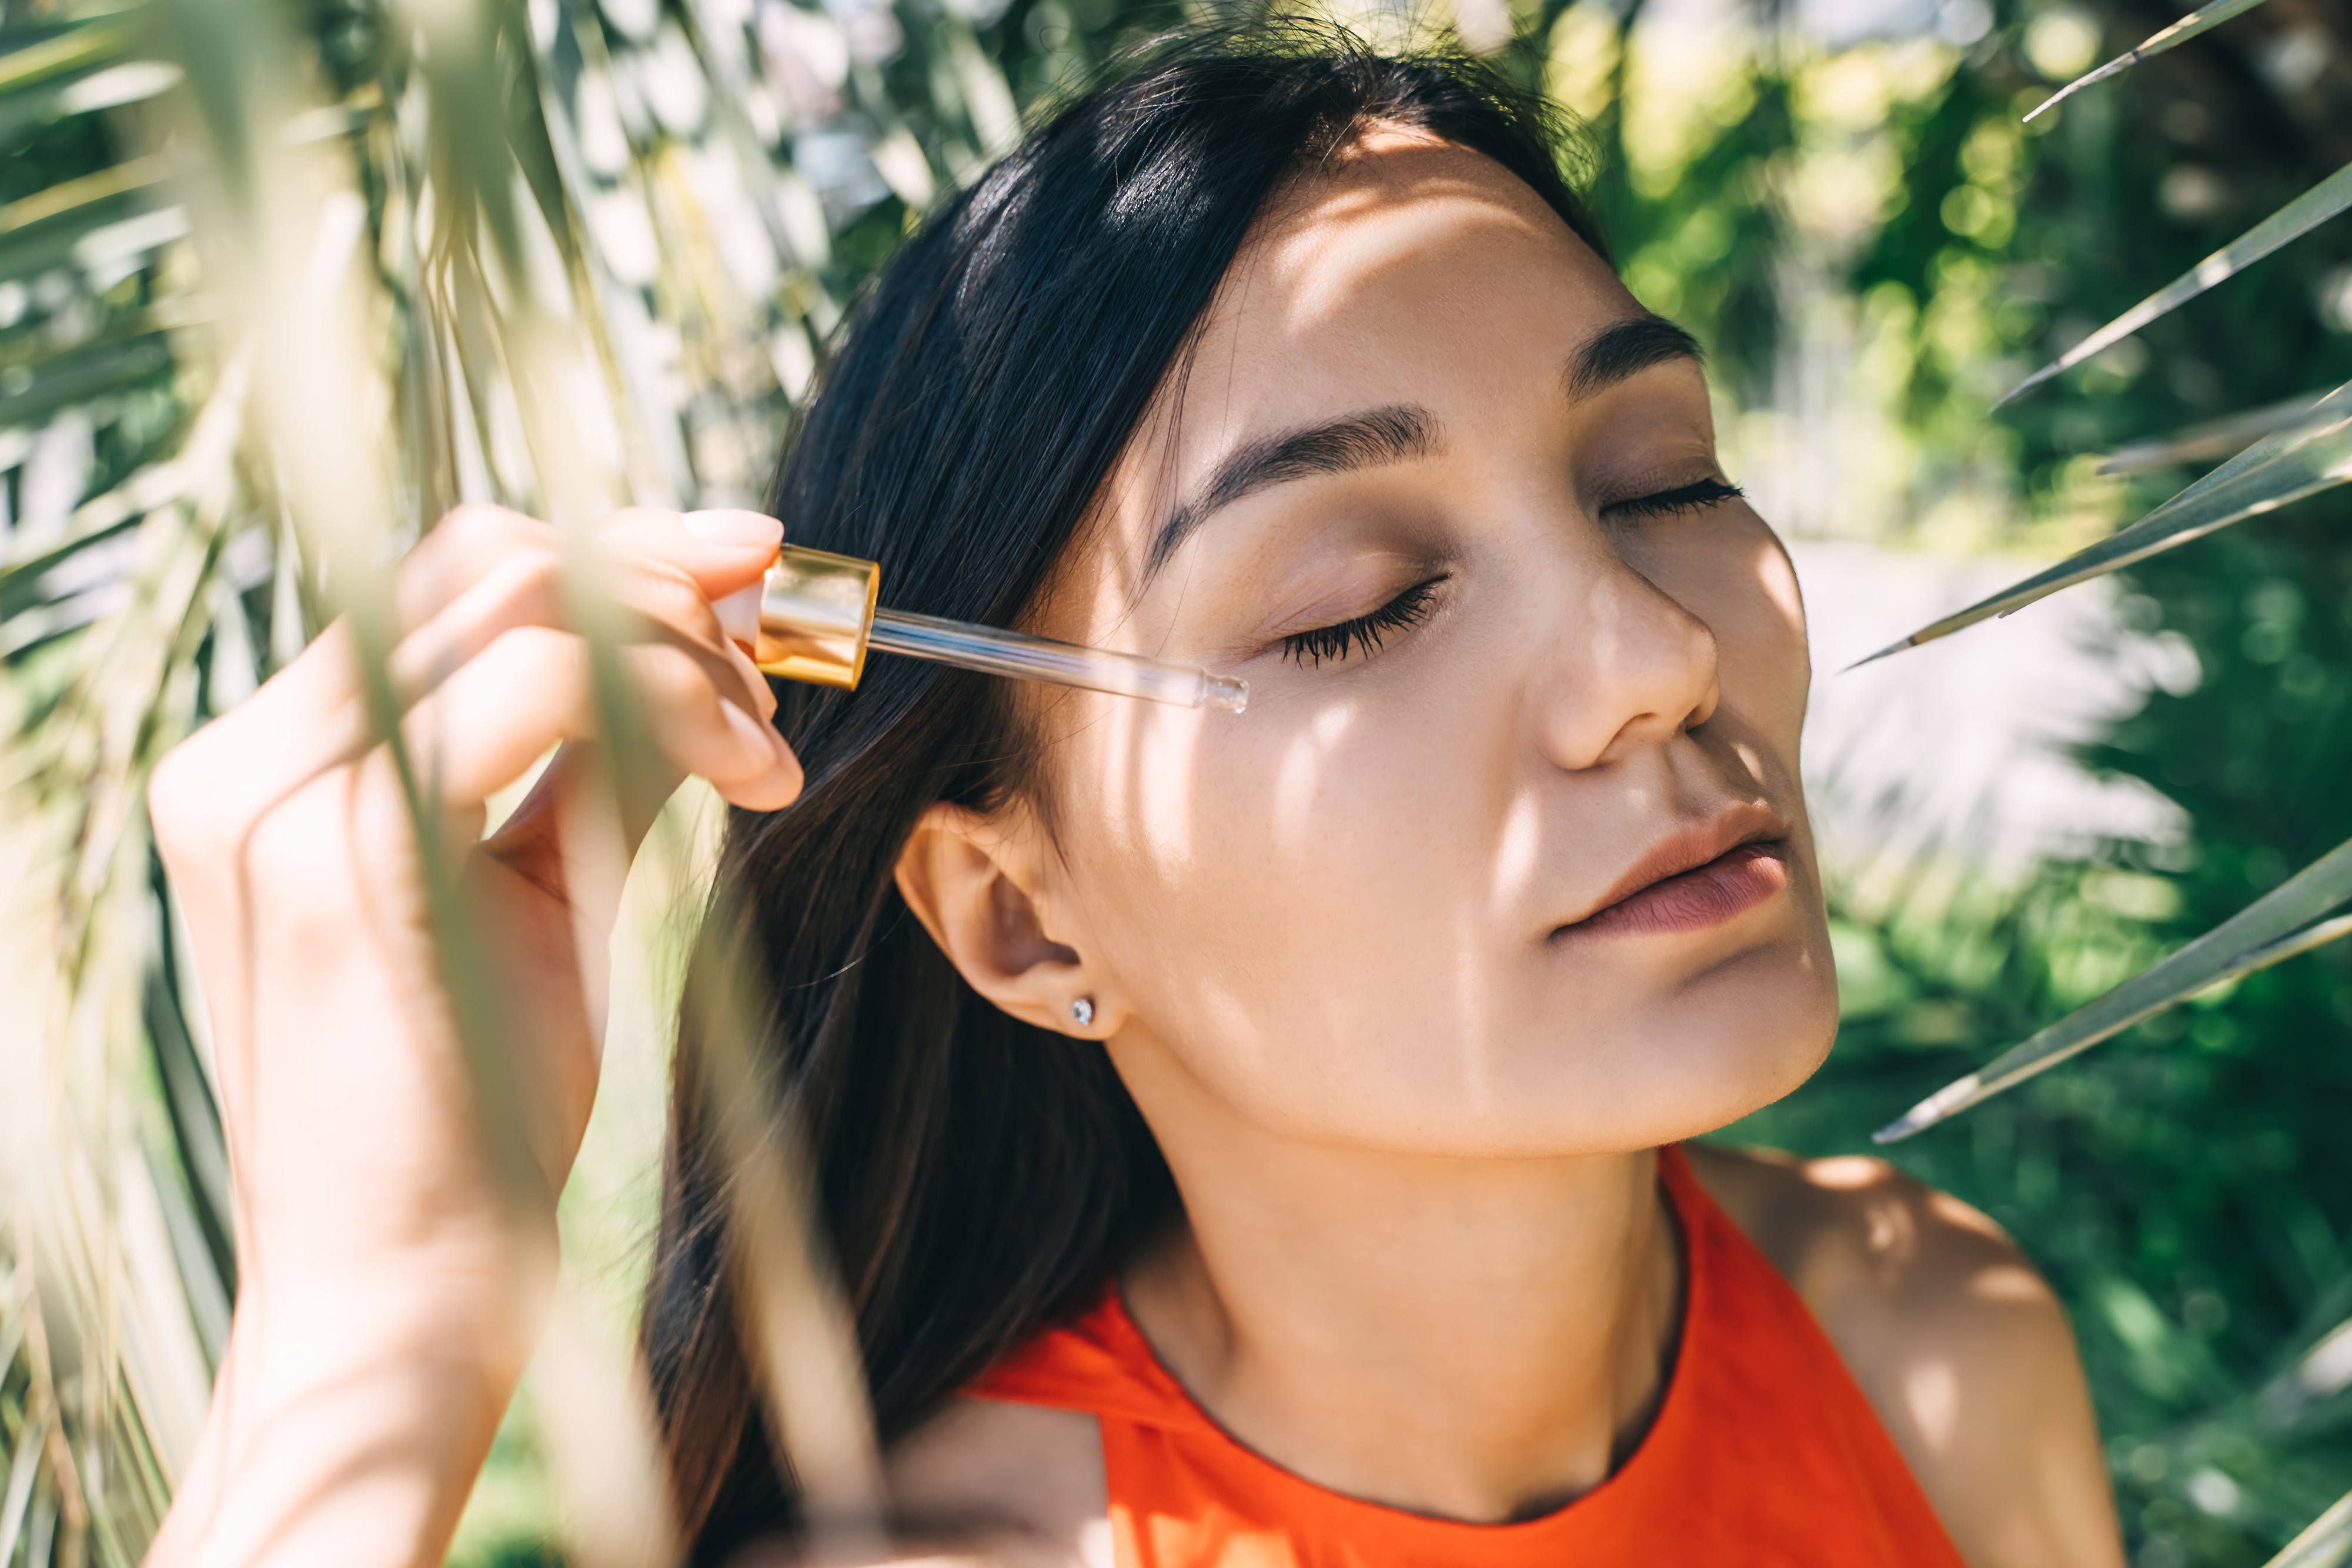 A beautiful young woman applies serum to her face with a pipette. Close-up portrait between palm leaves.